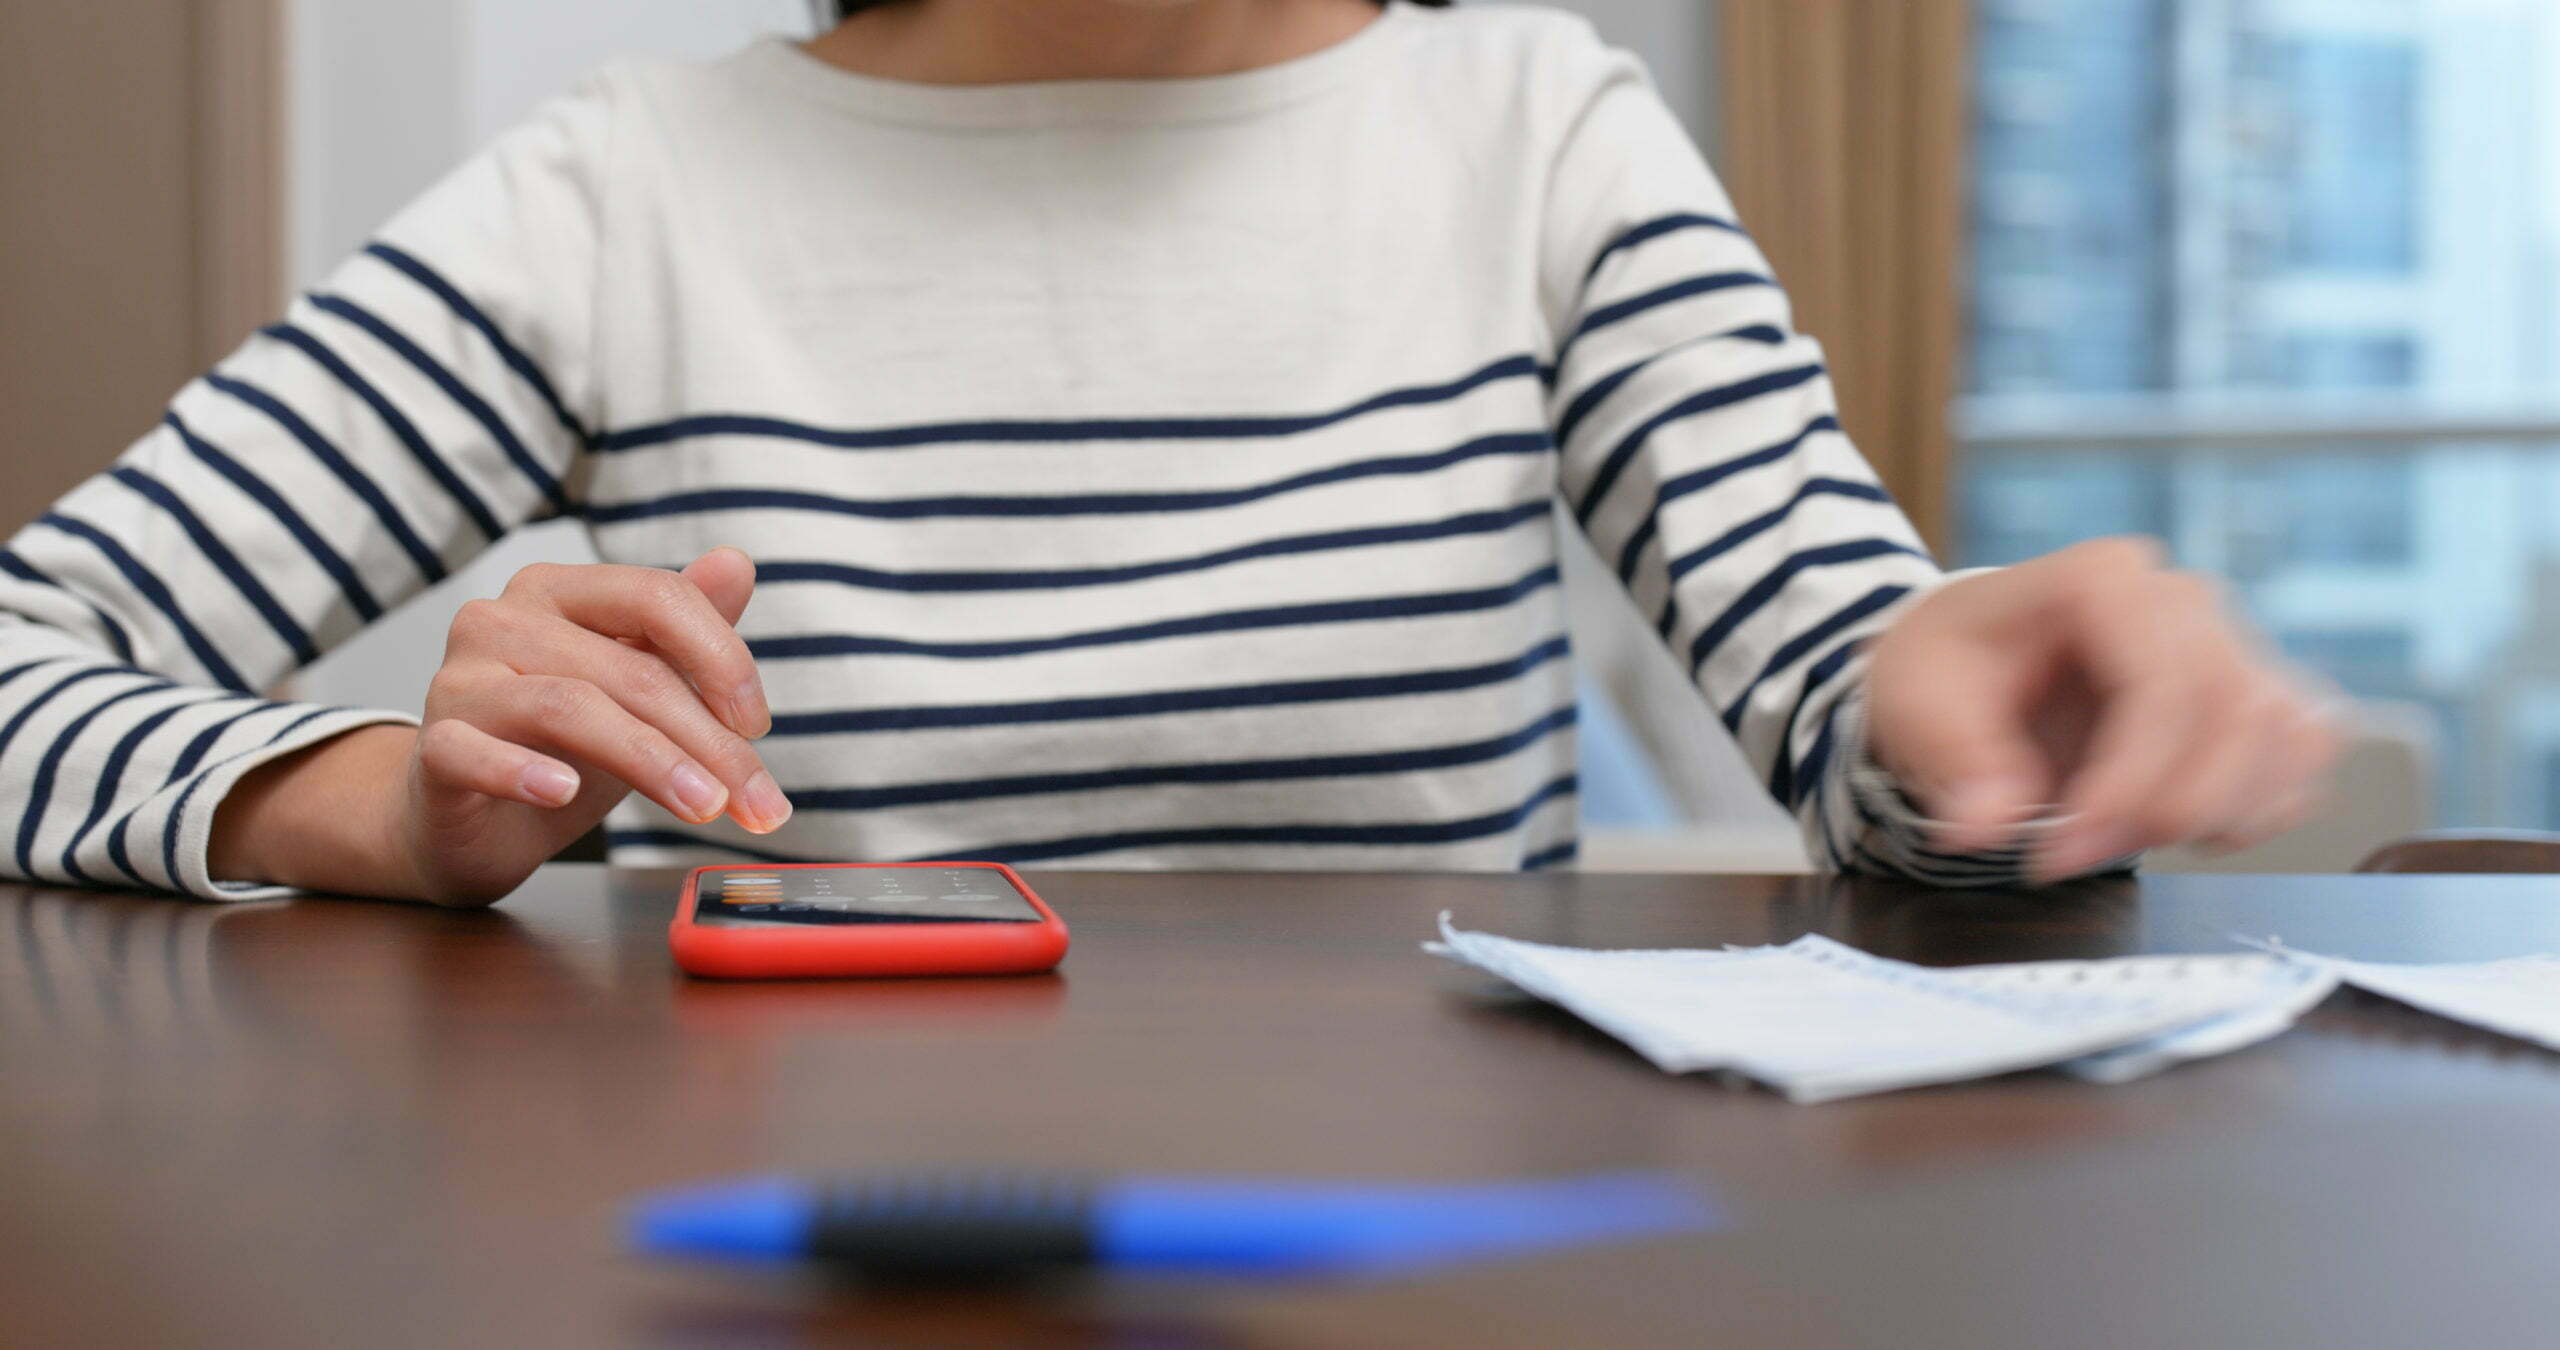 a person sitting at a table with a phone and a pen